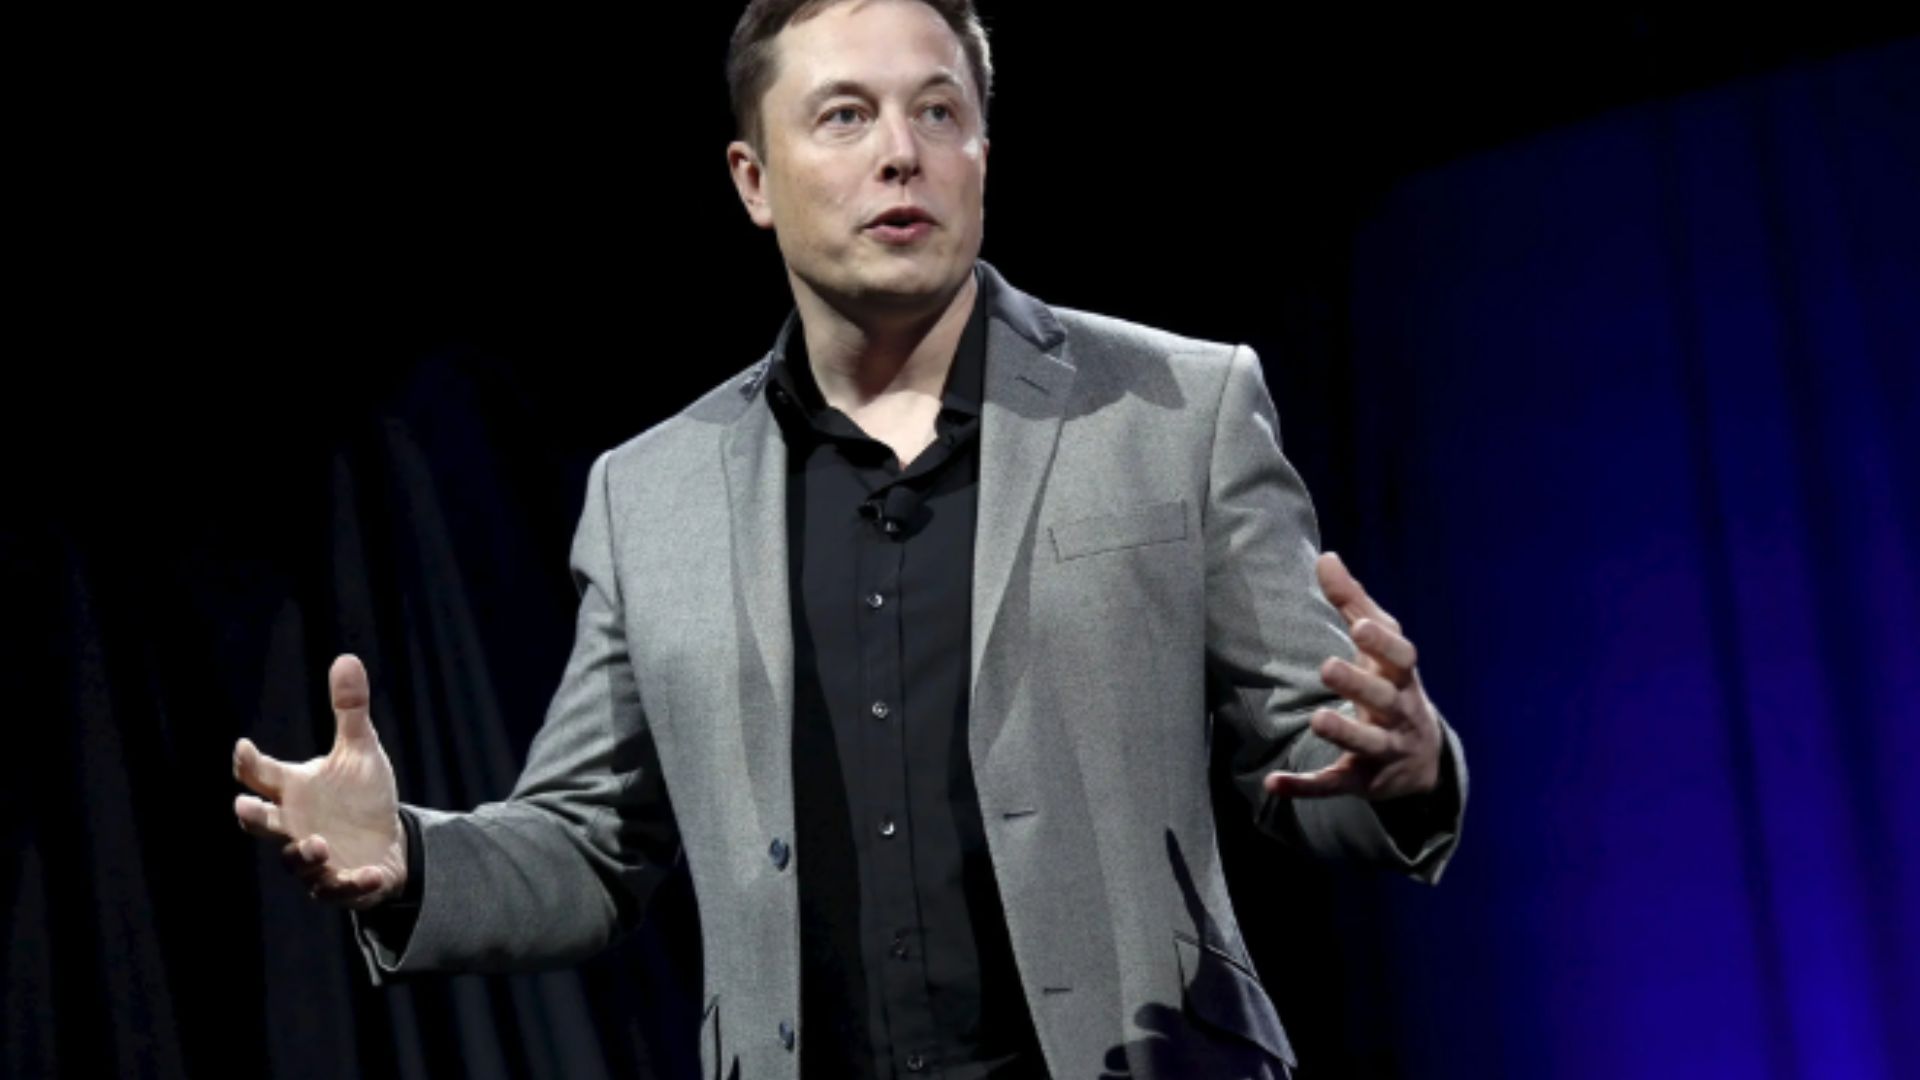 Elon Musk’s Transgender Daughter No Longer Wishes To Be Related With Father, Files Petition Seeking Name Change